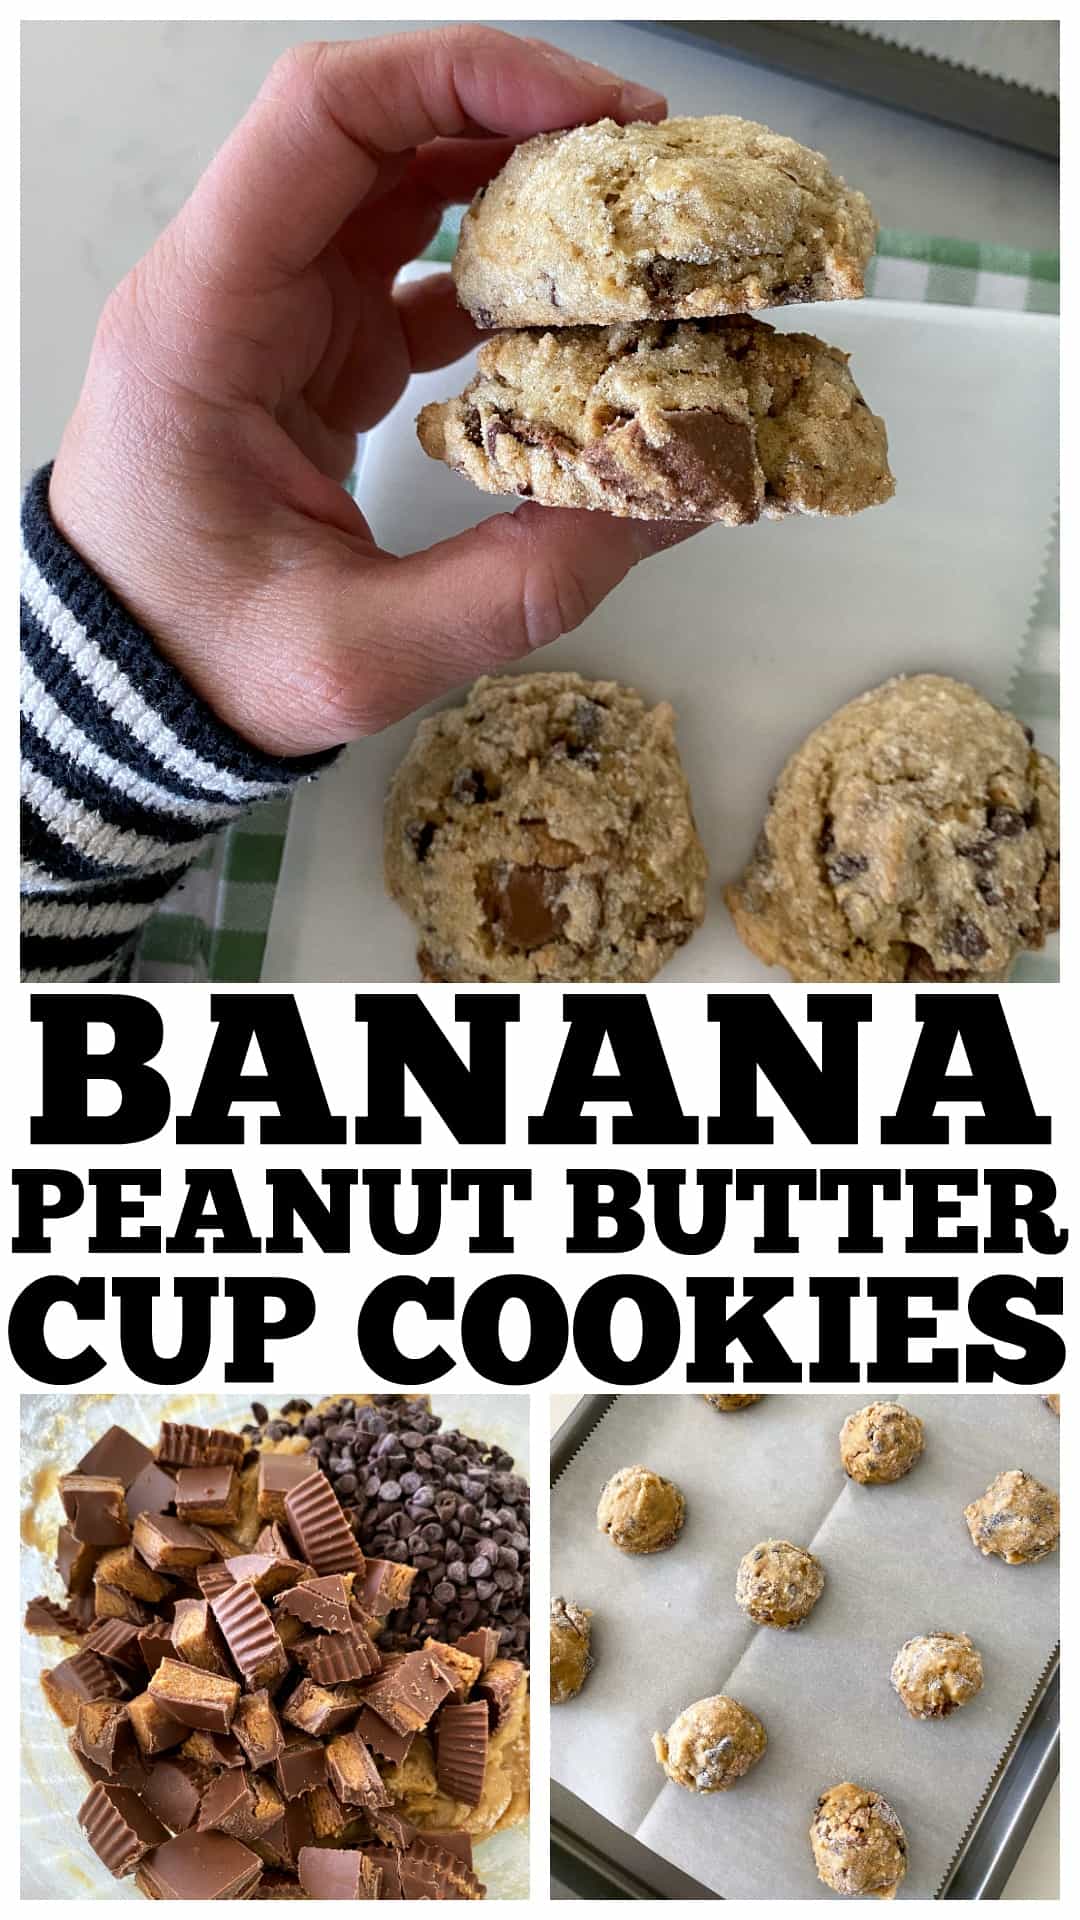 Photo Collage of Images of Banana Reese's Peanut Butter Cup Cookies